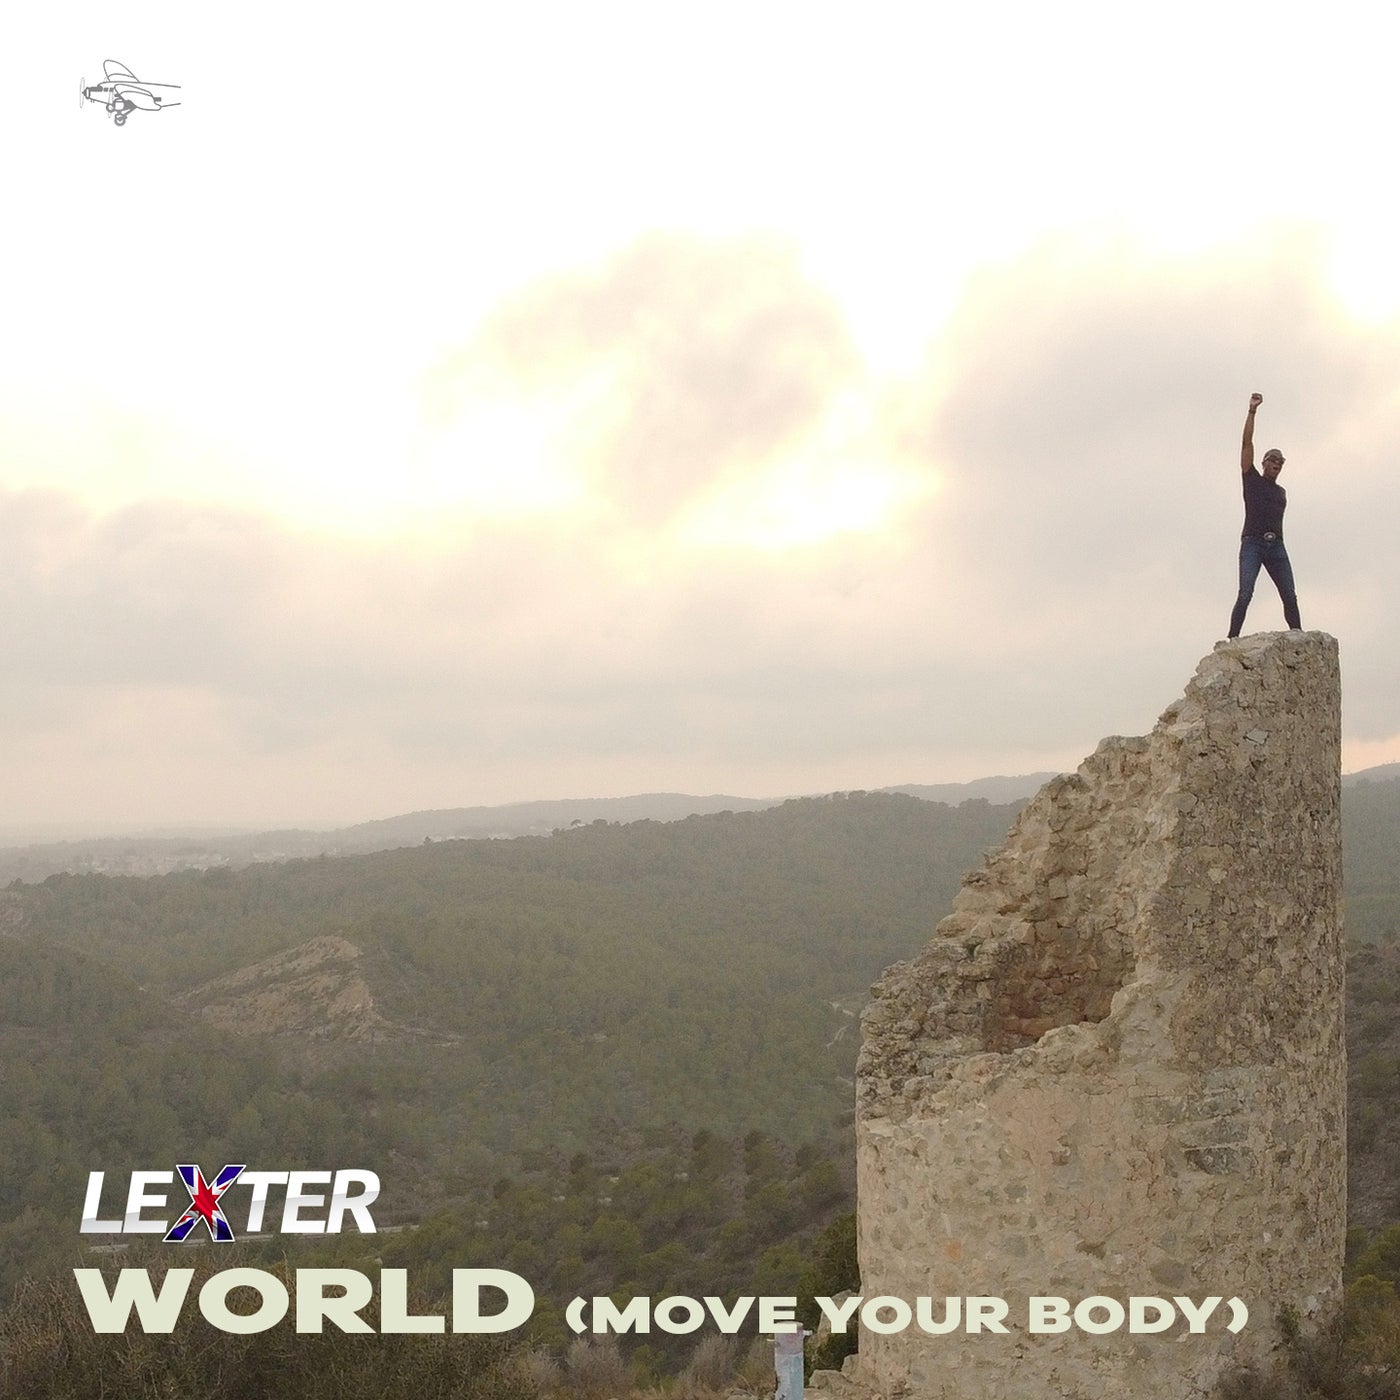 World (Move your body)